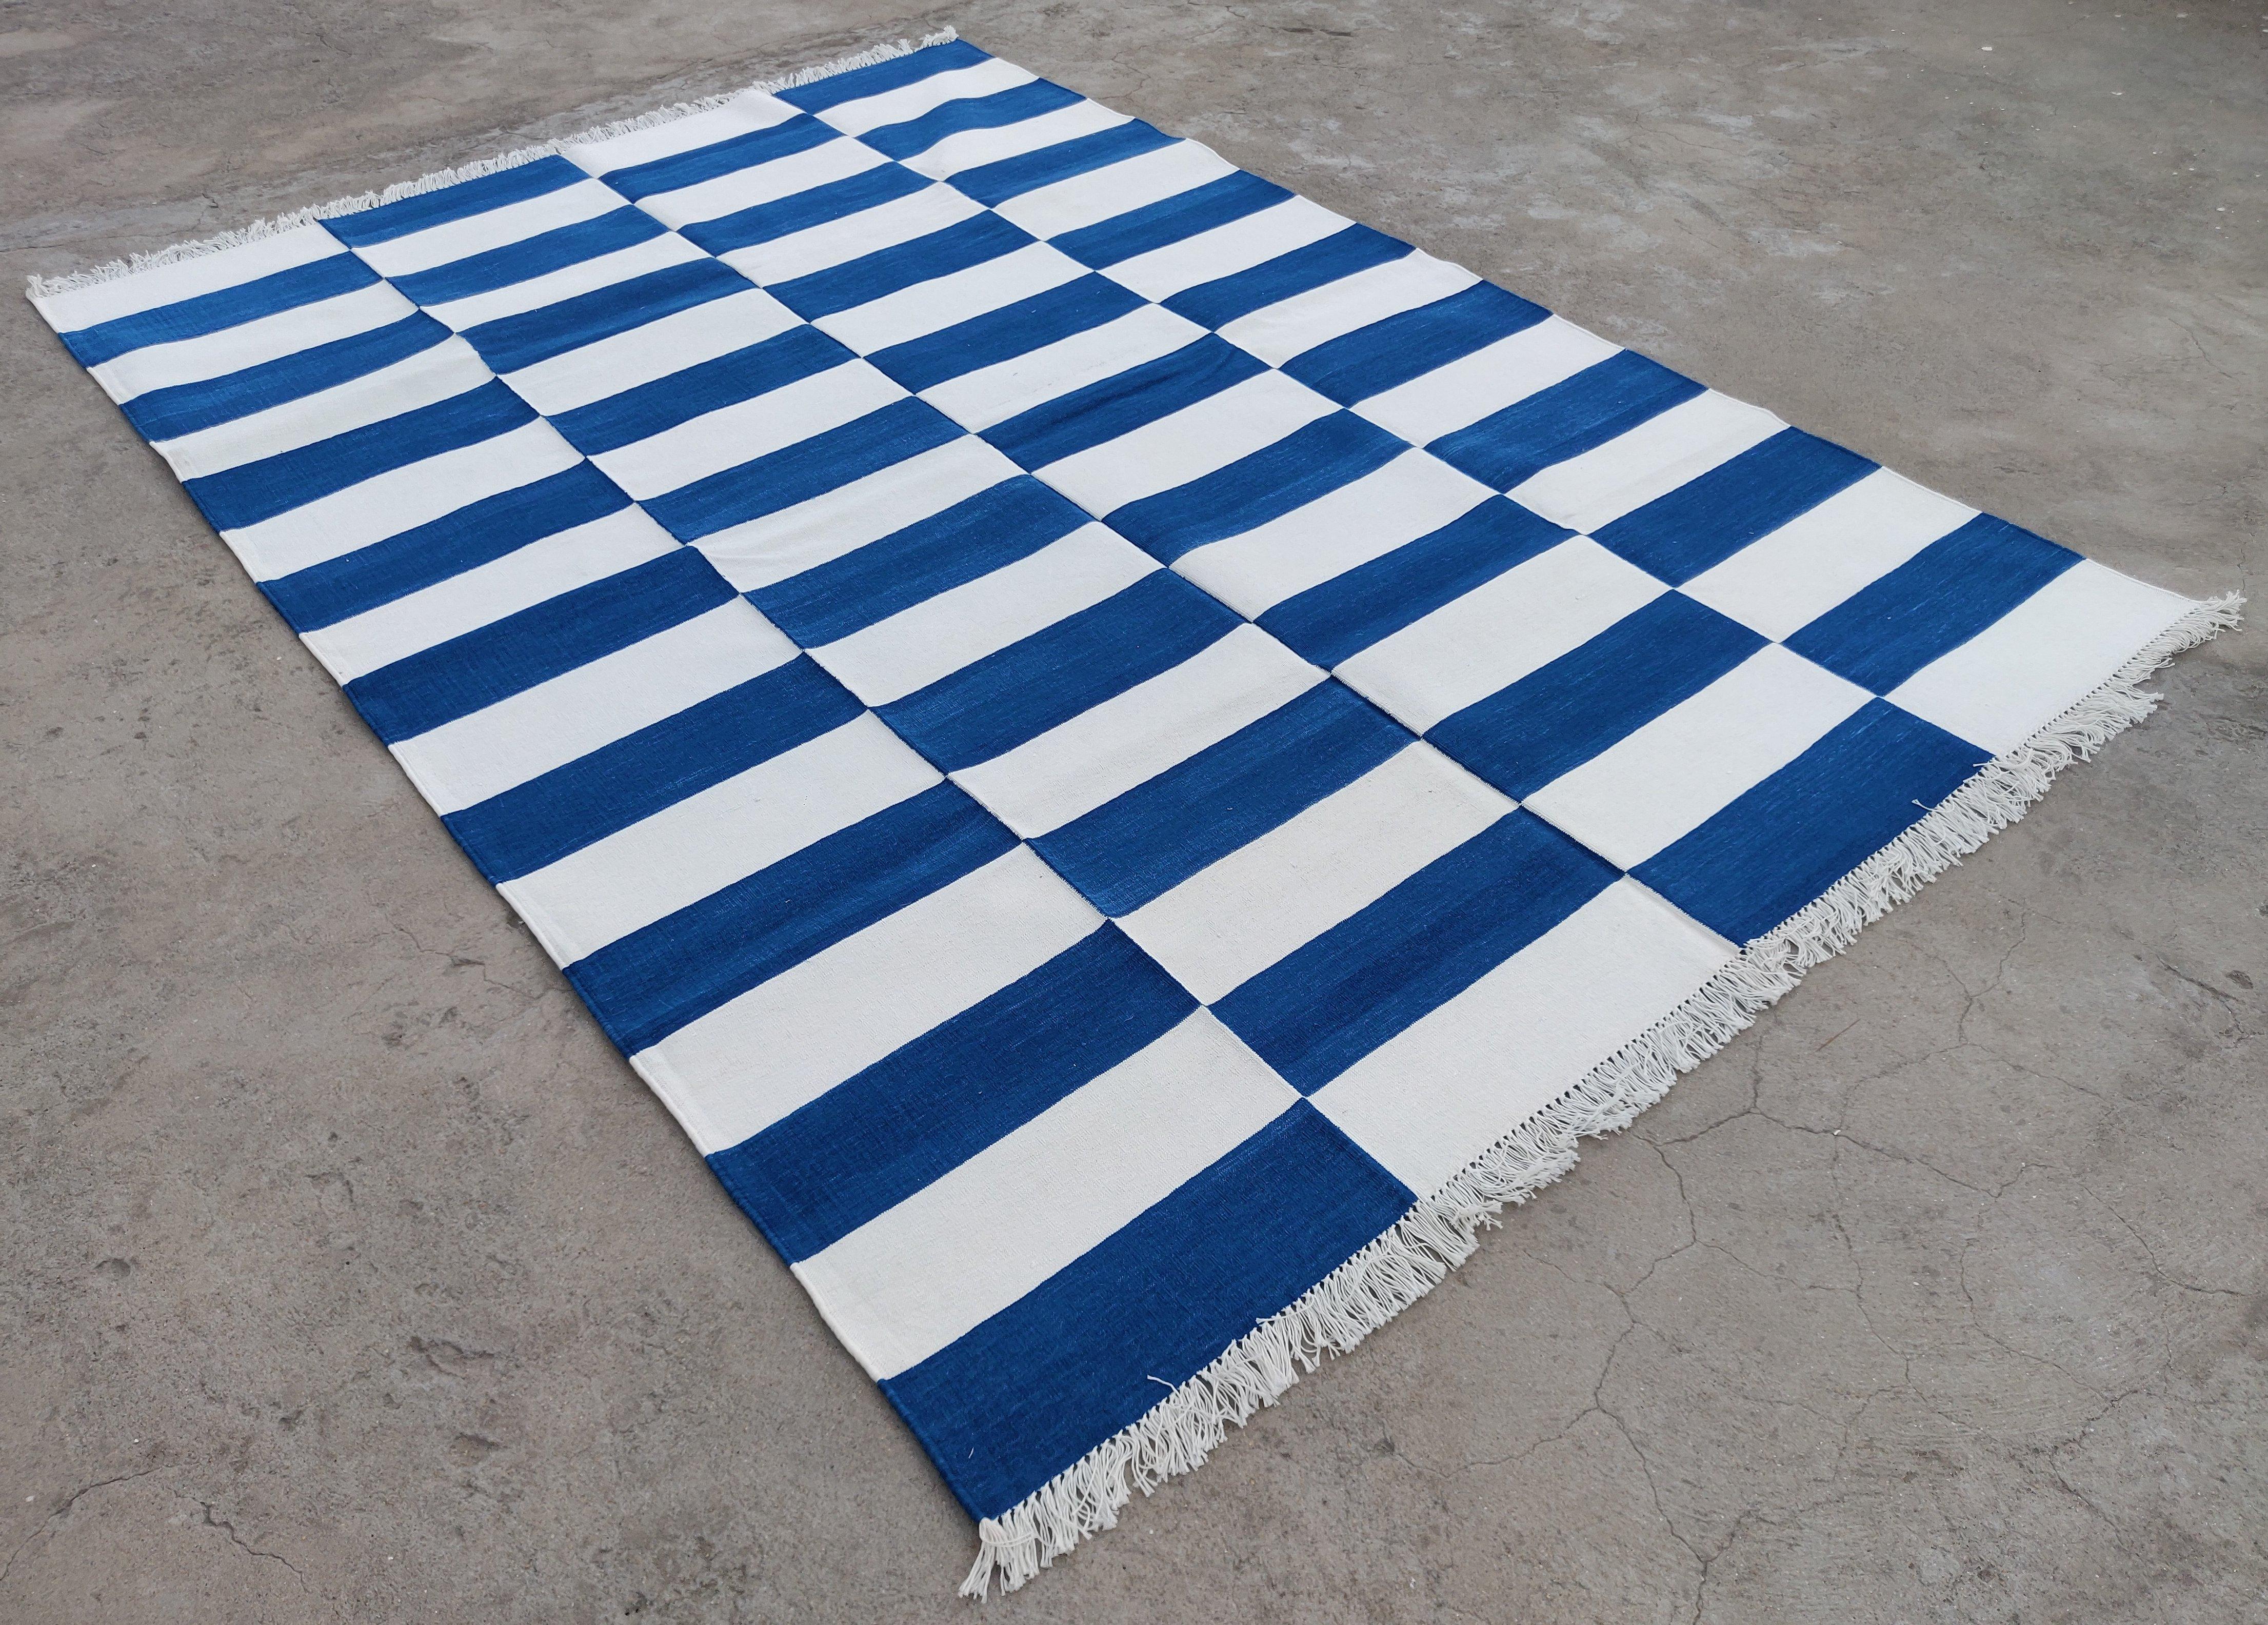 Cotton Vegetable Dyed Indigo Blue and White Up Down Striped Indian Dhurrie Rug-6'x9' 

These special flat-weave dhurries are hand-woven with 15 ply 100% cotton yarn. Due to the special manufacturing techniques used to create our rugs, the size and